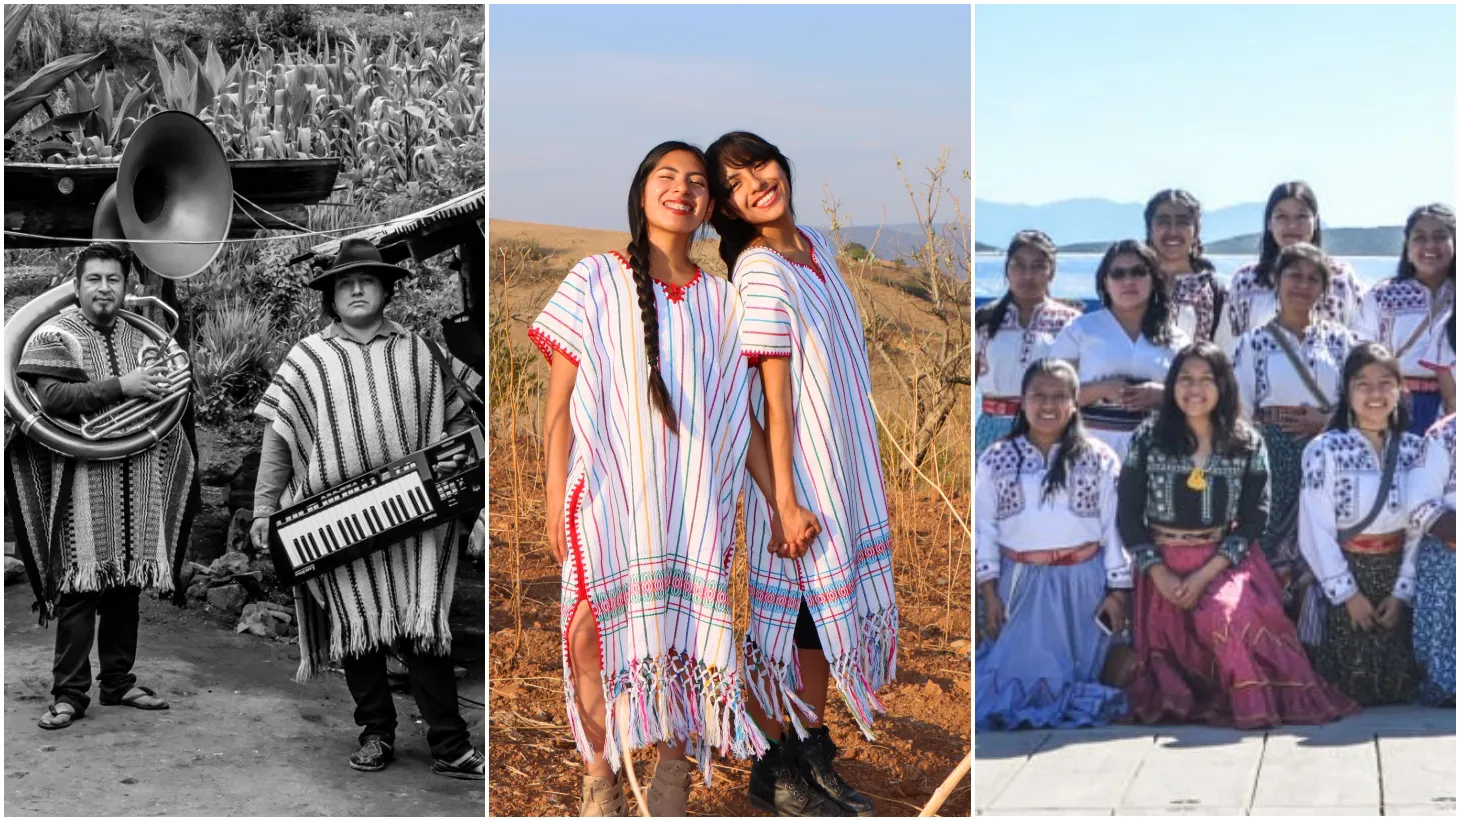 Episode 9 features the rich cultural traditions of Mexican music as well as its political and revolutionary future. Featuring Los Pream, Dueto Dos Rosas and Banda Femenil Regional.